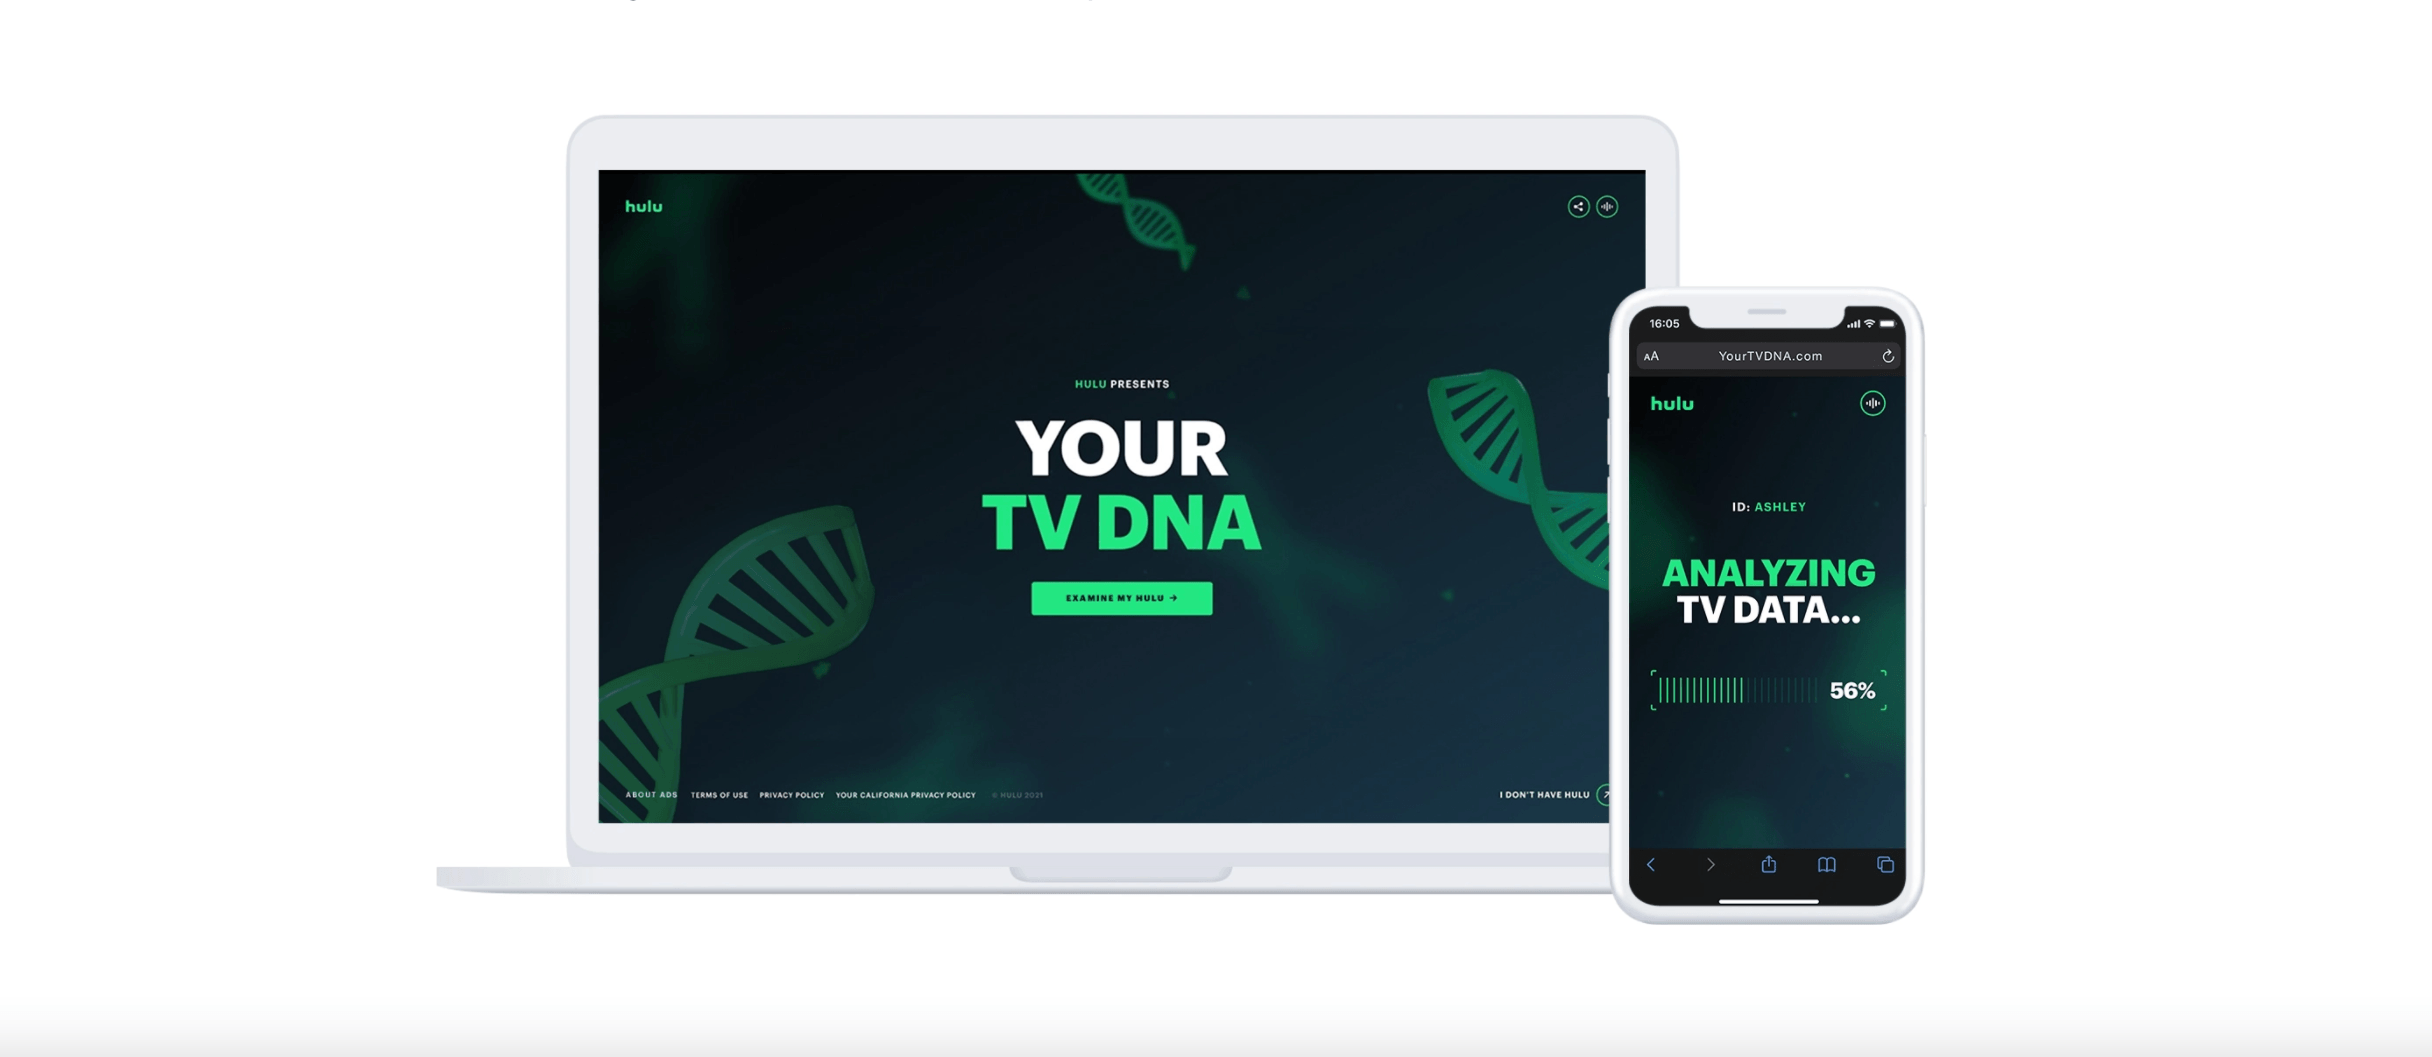 Hulu Unveils ‘Your TV DNA’ Showing Users their 2021 Viewing Habits